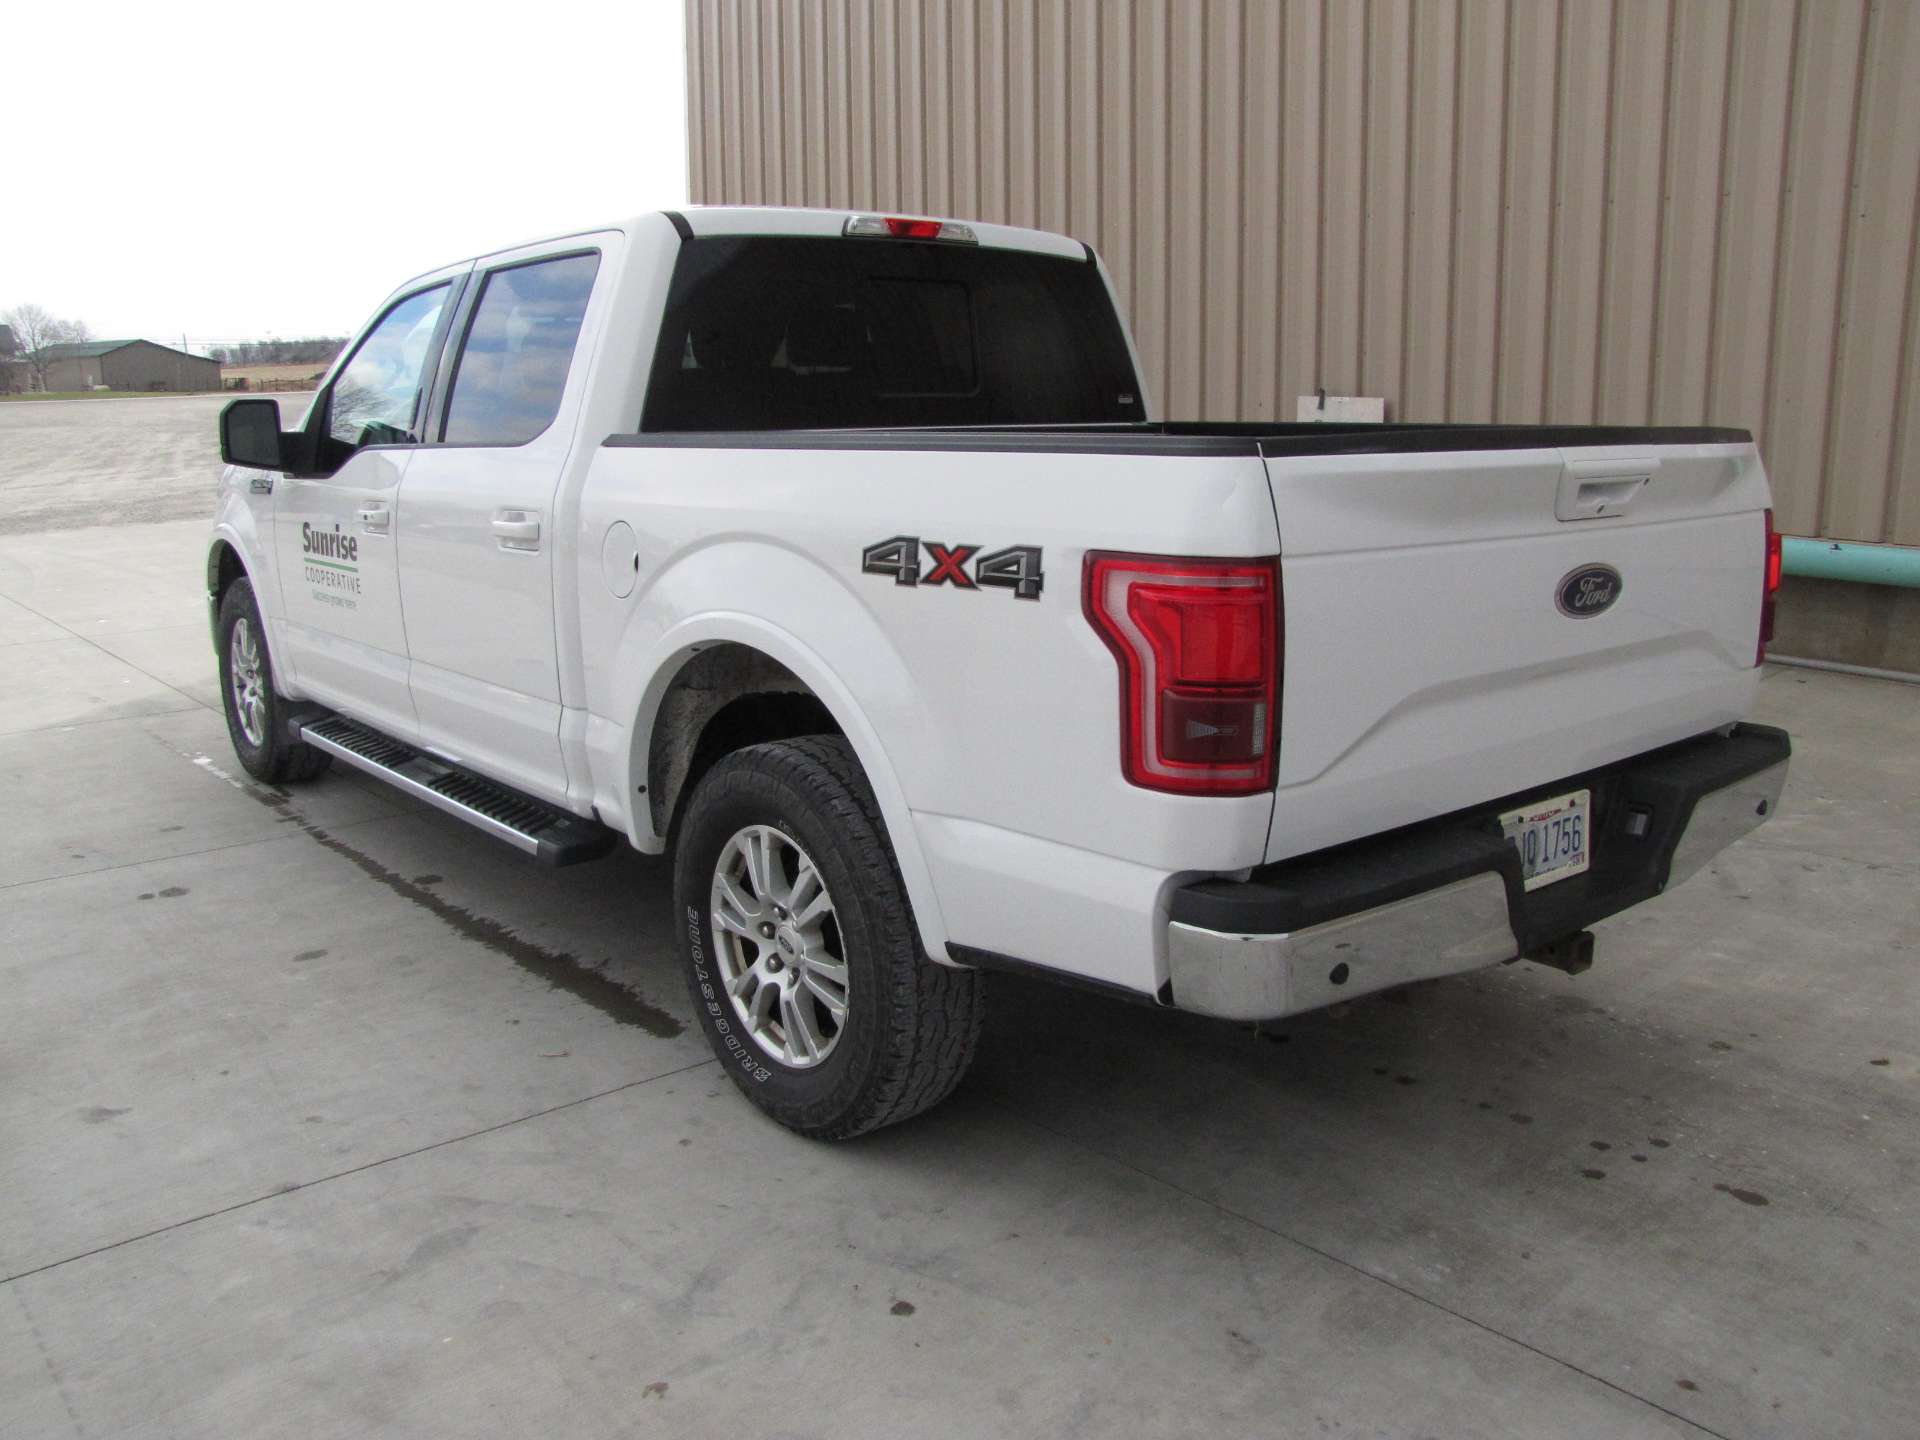 2017 Ford F-150 Lariat pickup truck - Image 7 of 54